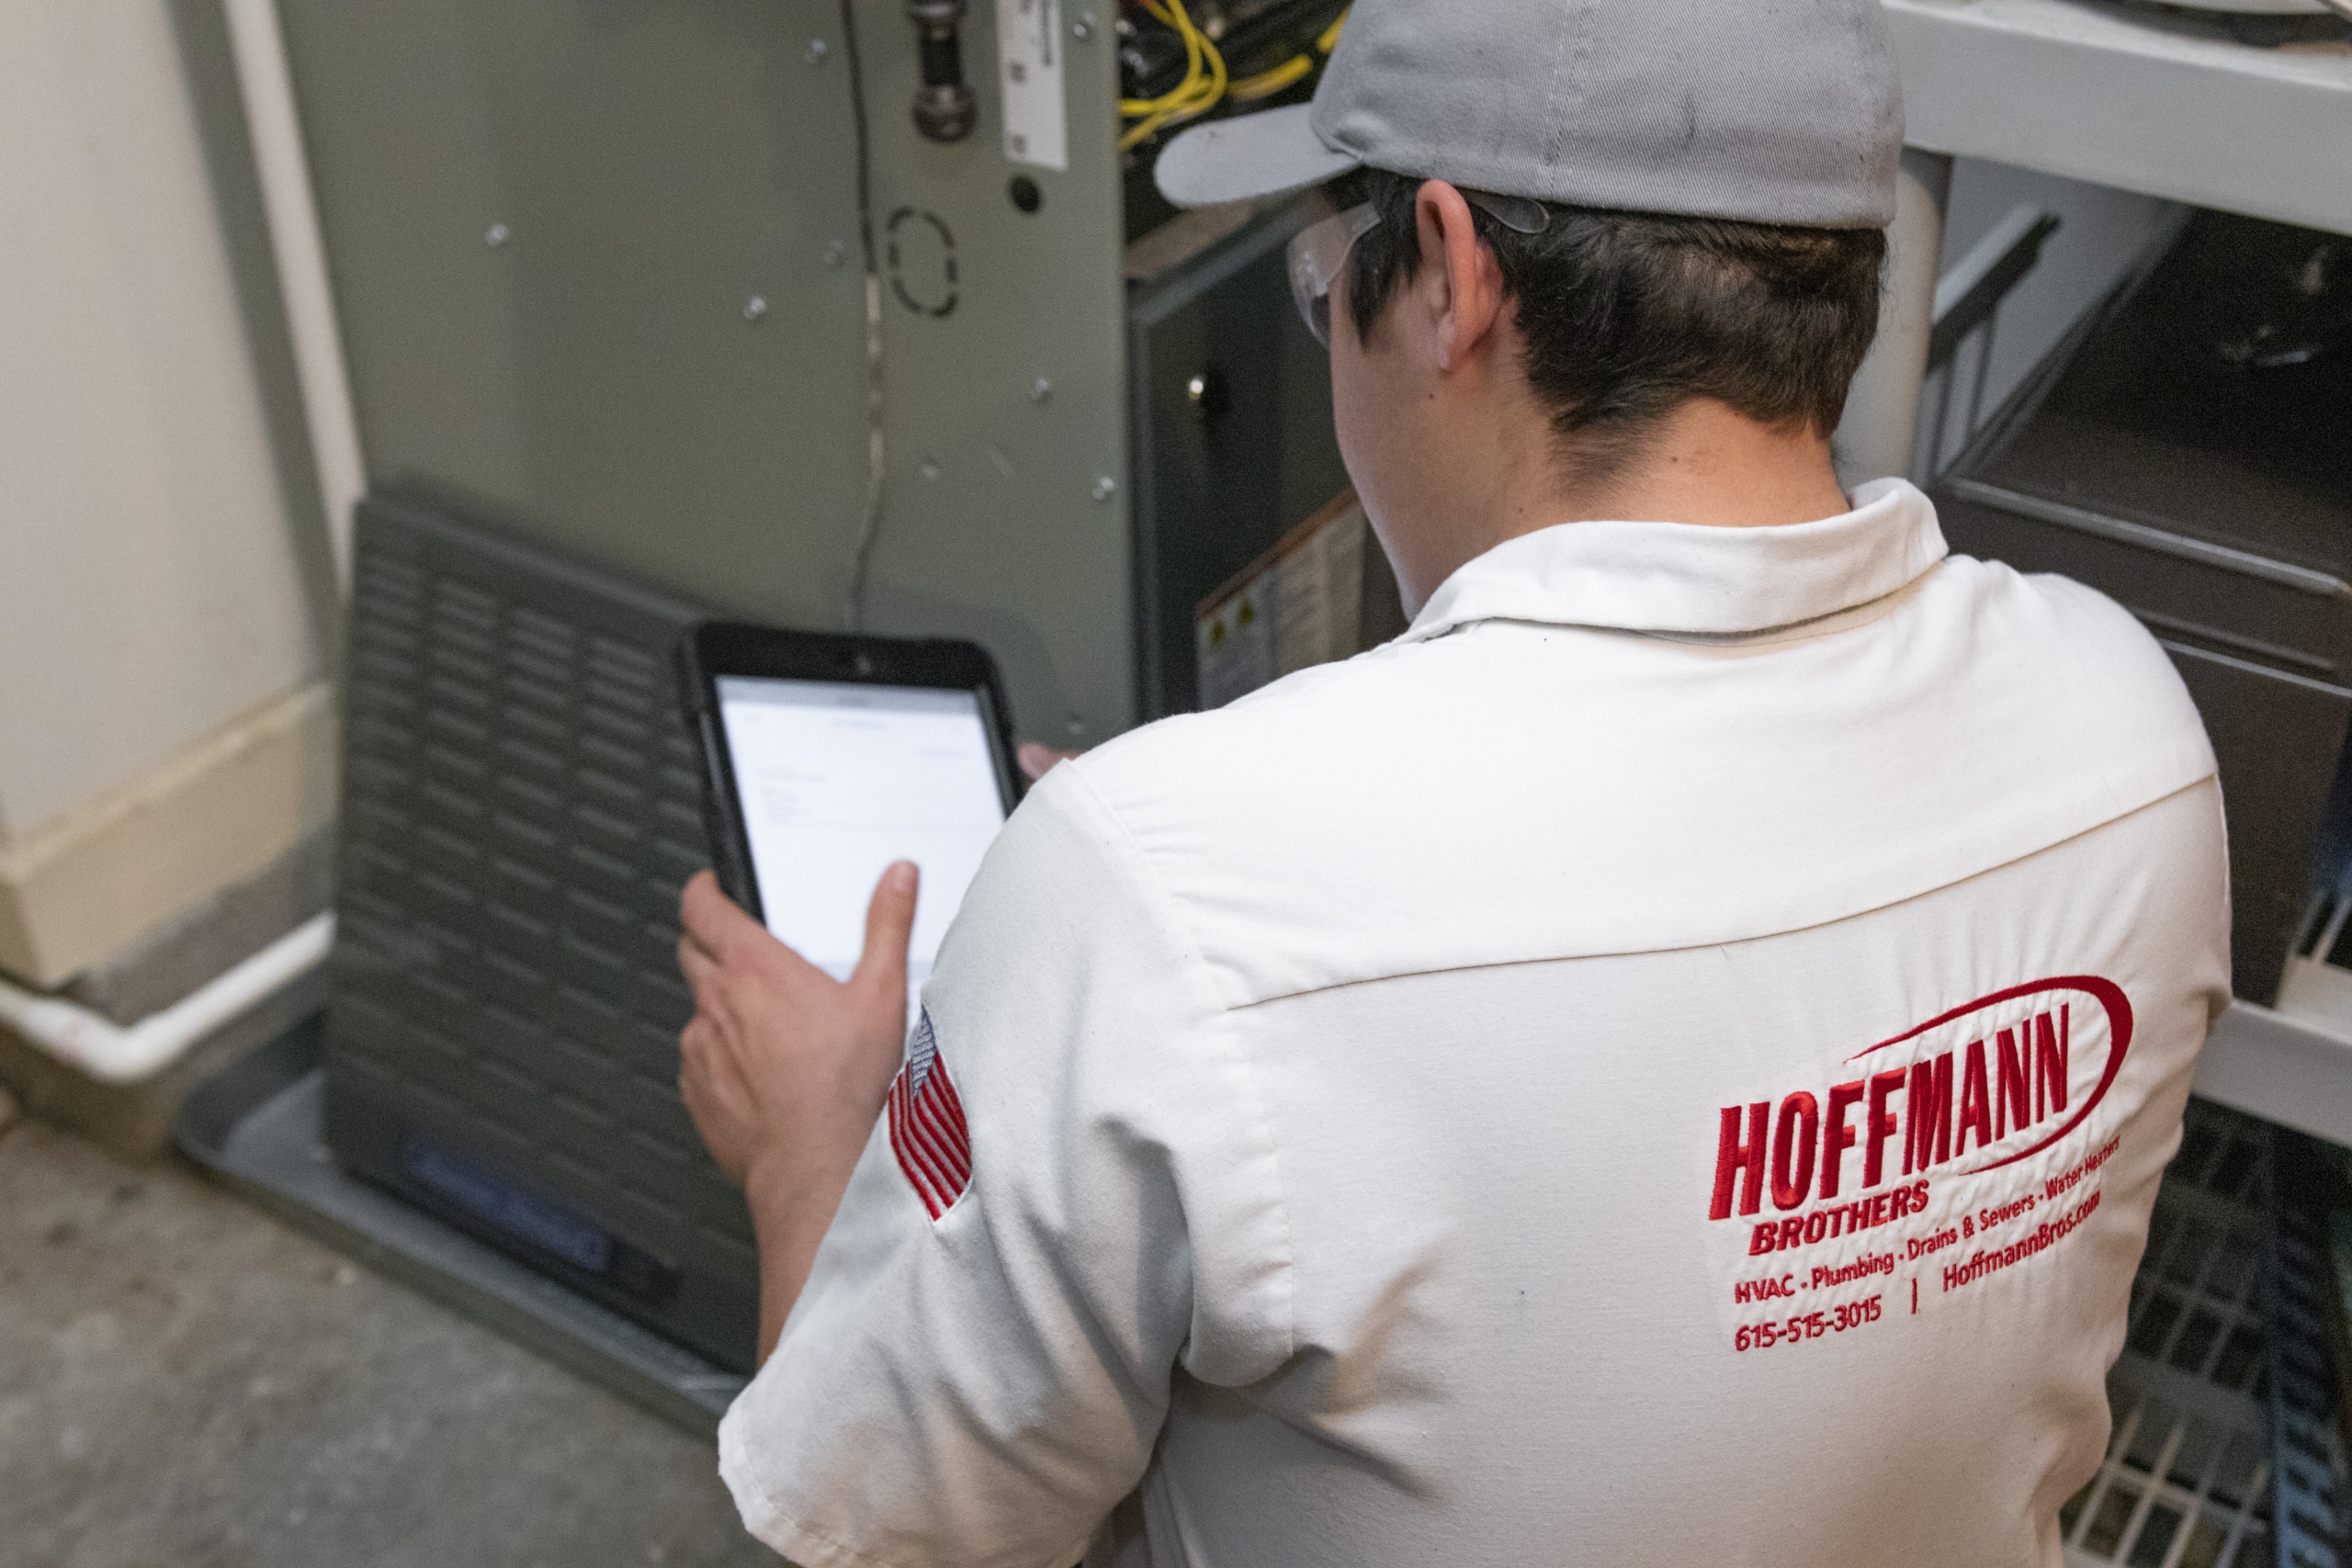 Furnace Installation Services By Hoffmann Brothers In Nashville, TN